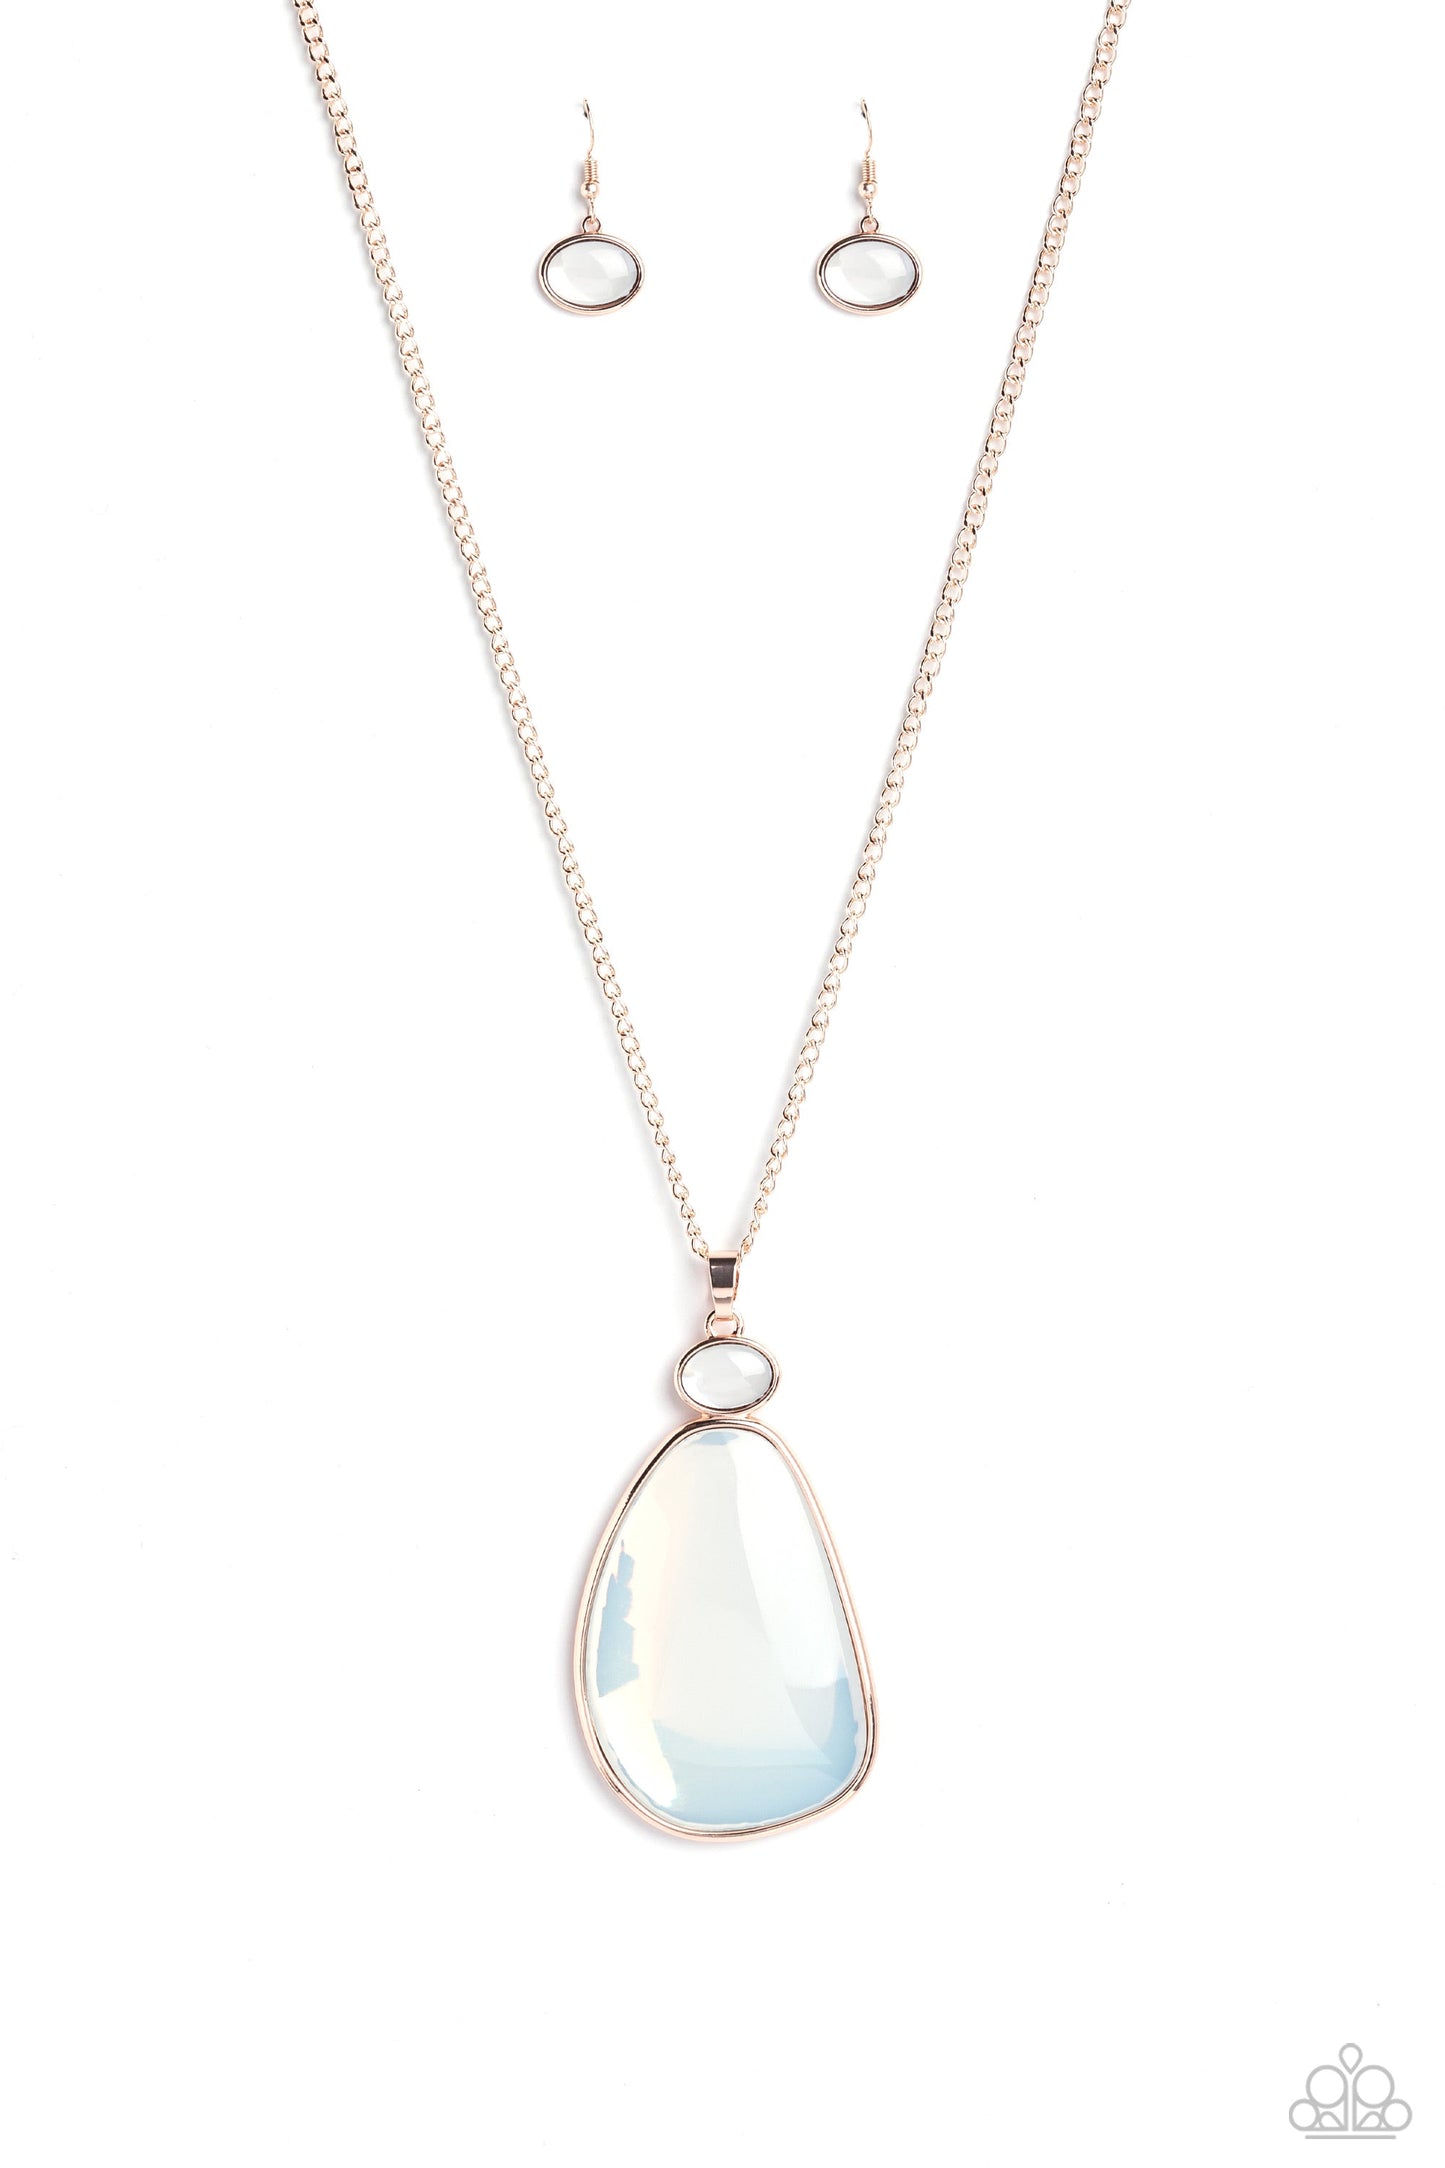 Geometric Glow - Rose Gold Abstract Frame/Oversized White Milky Oval Pendant Paparazzi Necklace & matching earrings